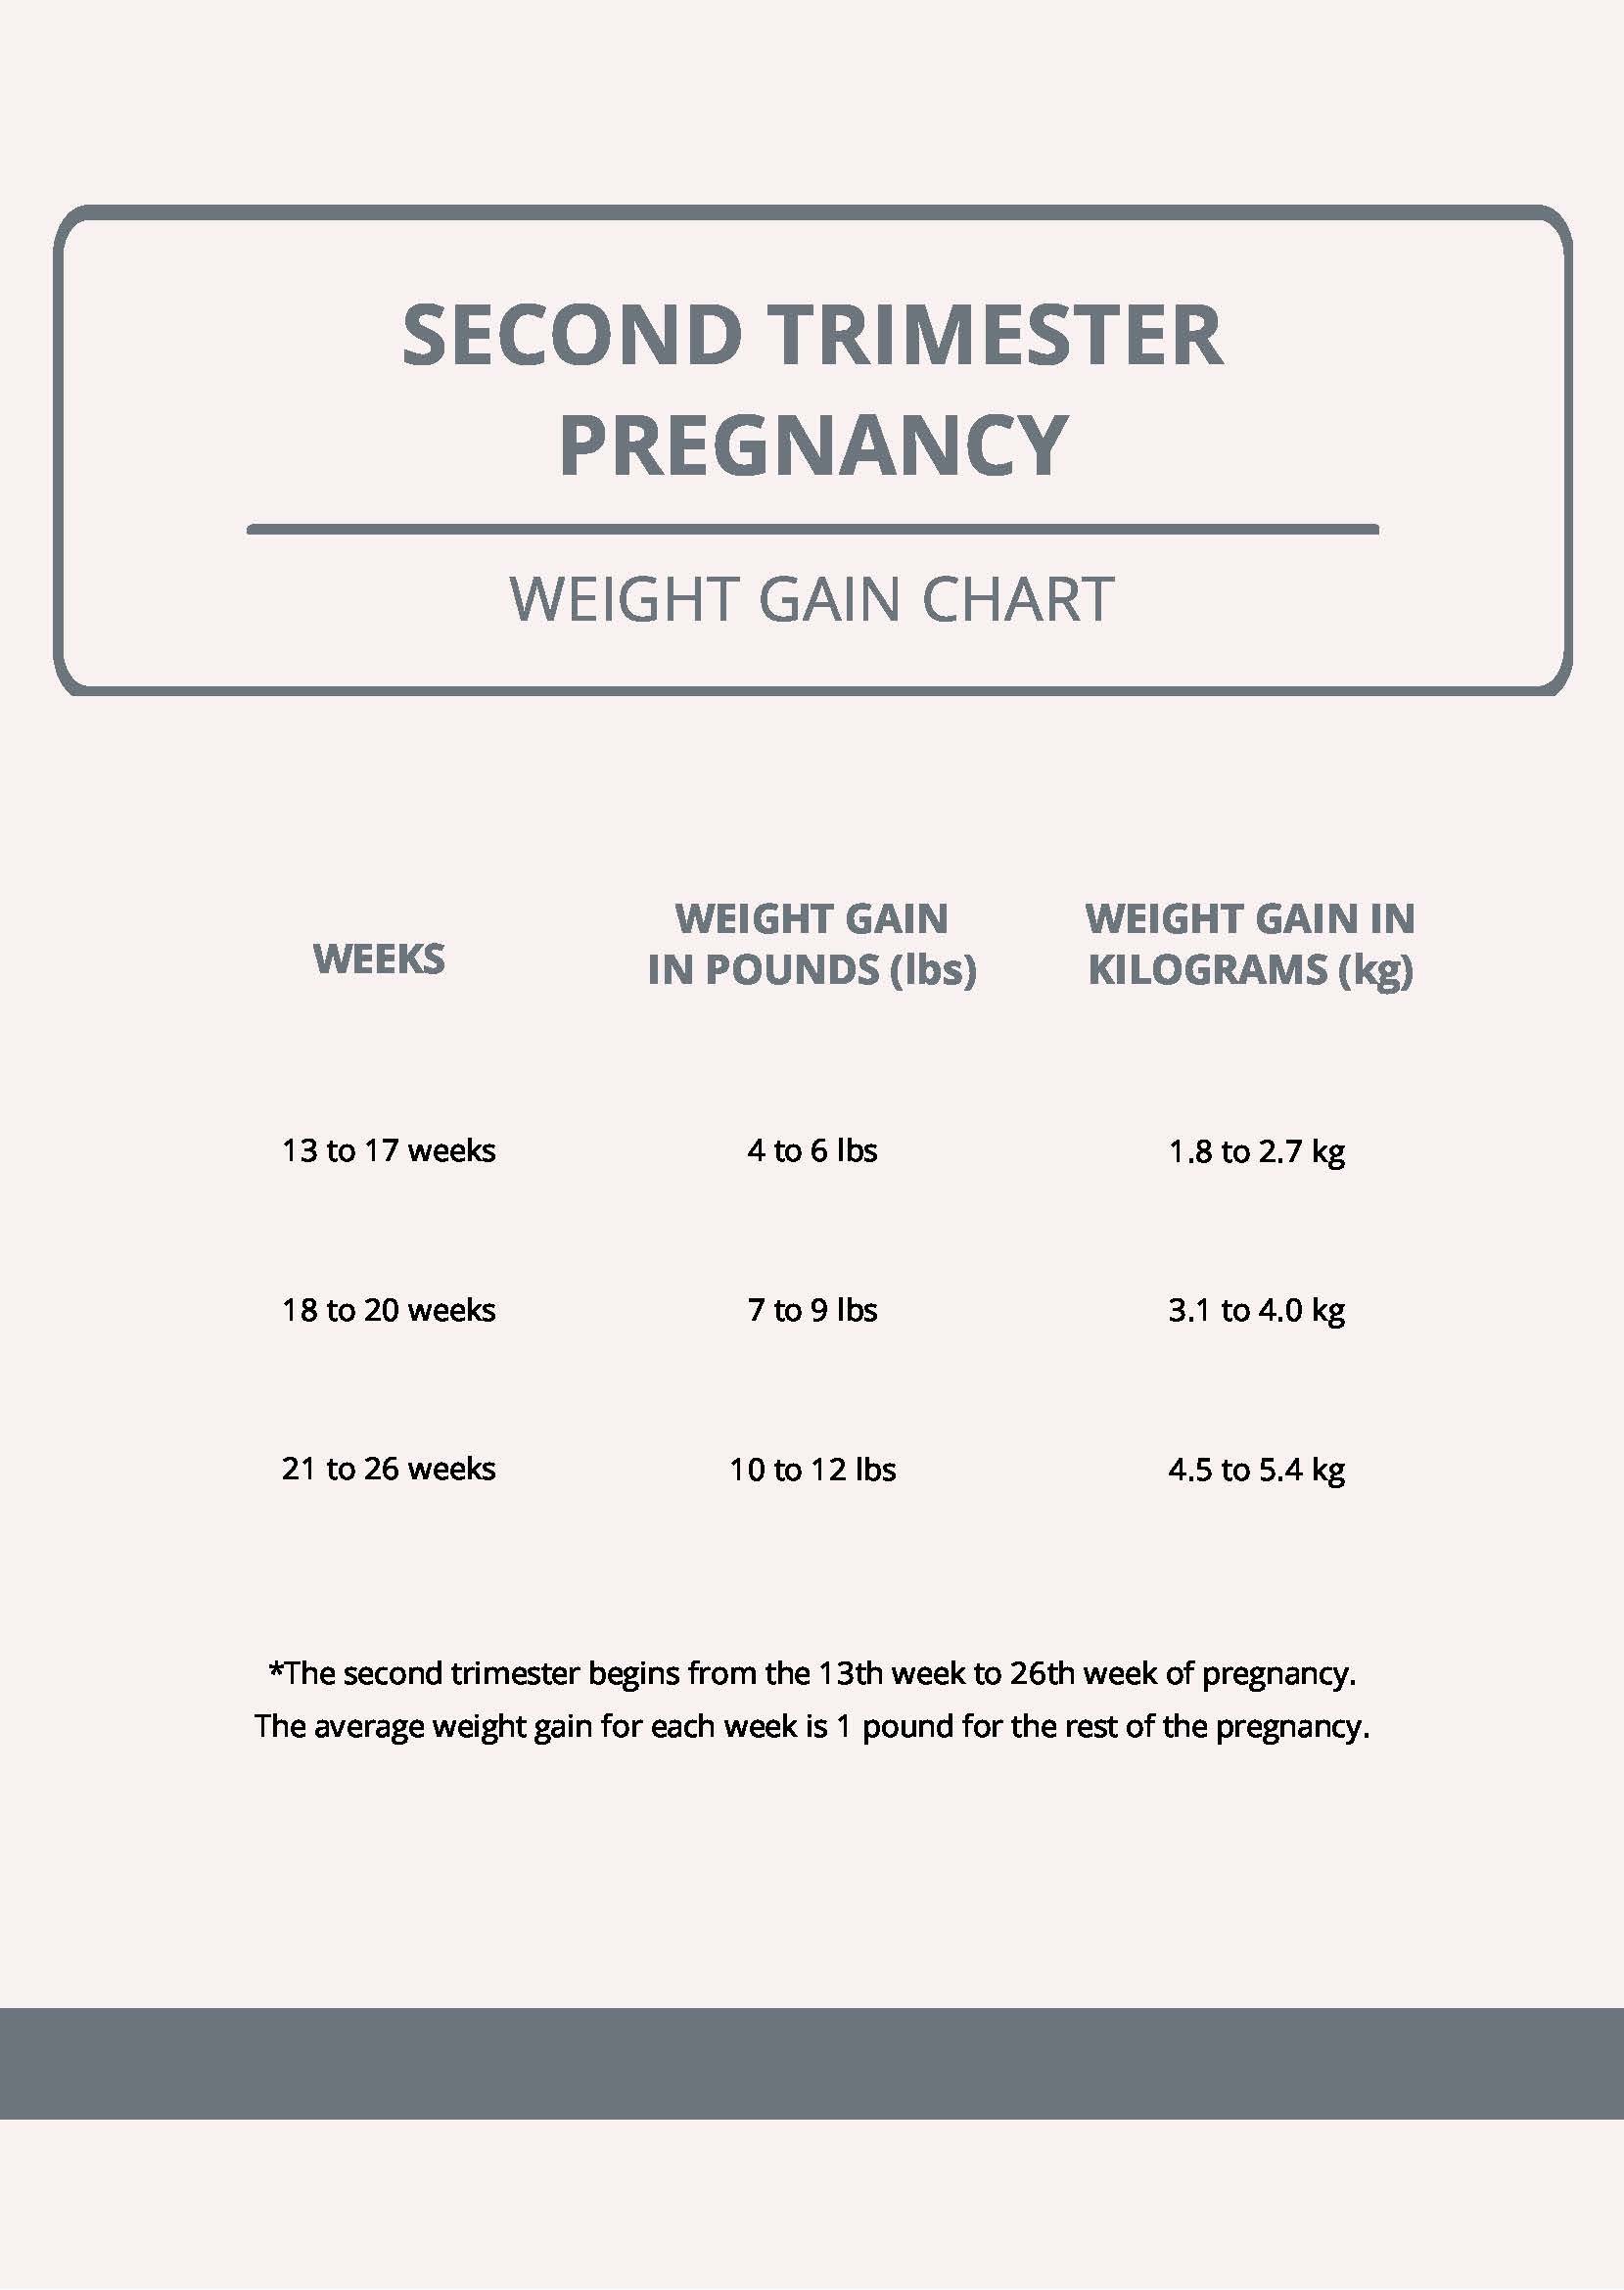 Second Trimester Pregnancy Weight Gain Chart